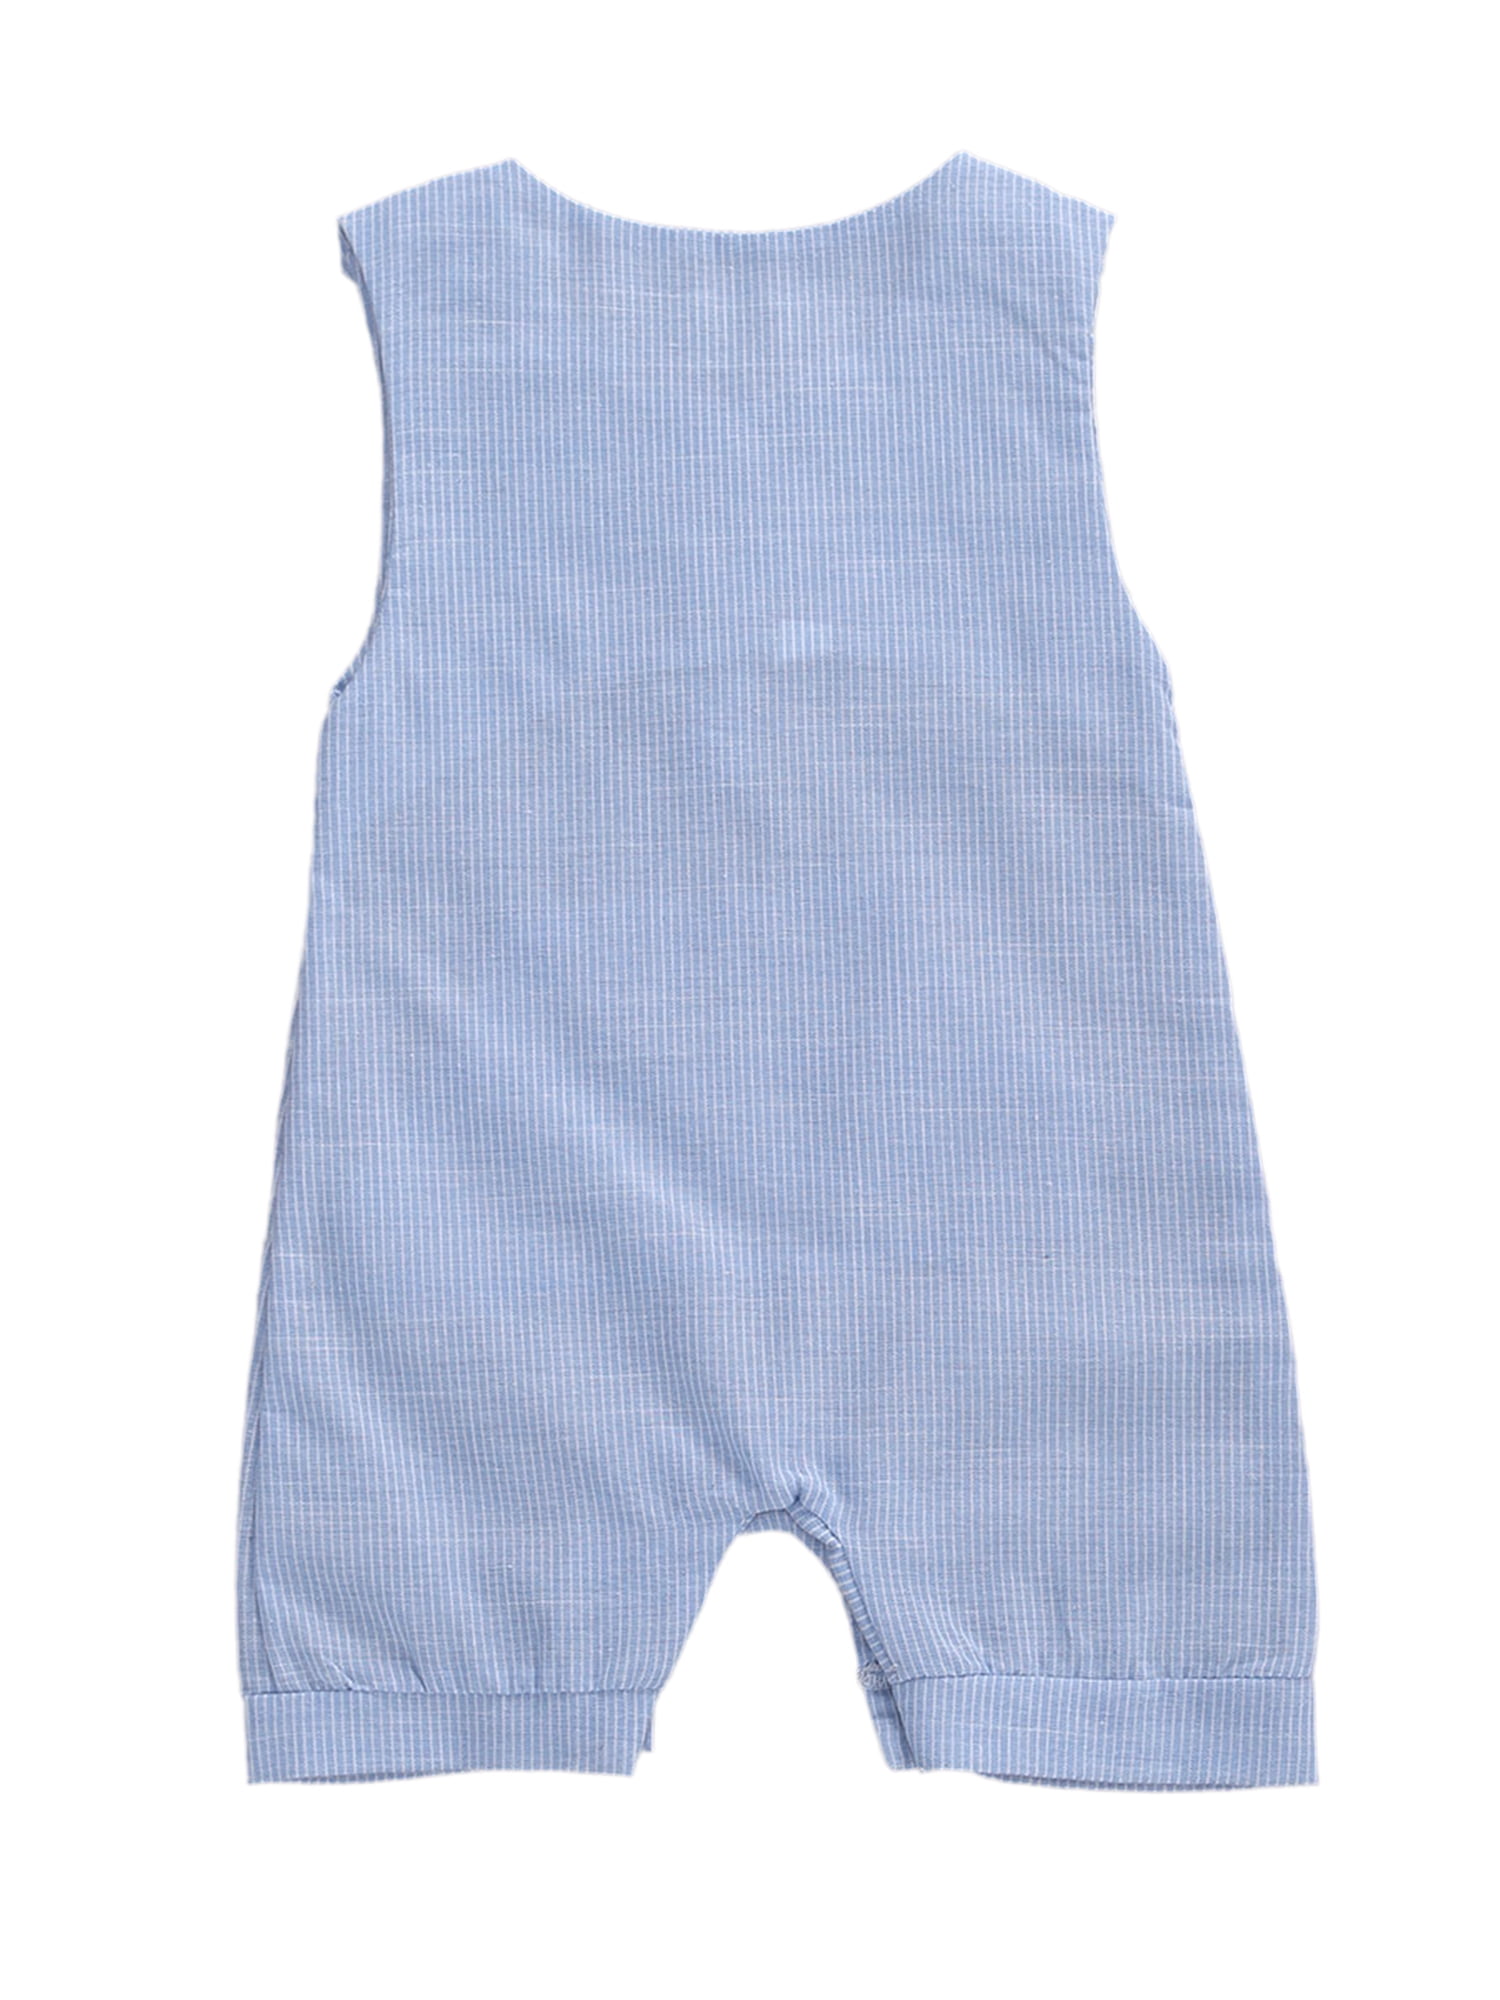 New Girls ex M&S Spring Summer Jumpsuit for Next Holiday age 12 Months-4 Years 